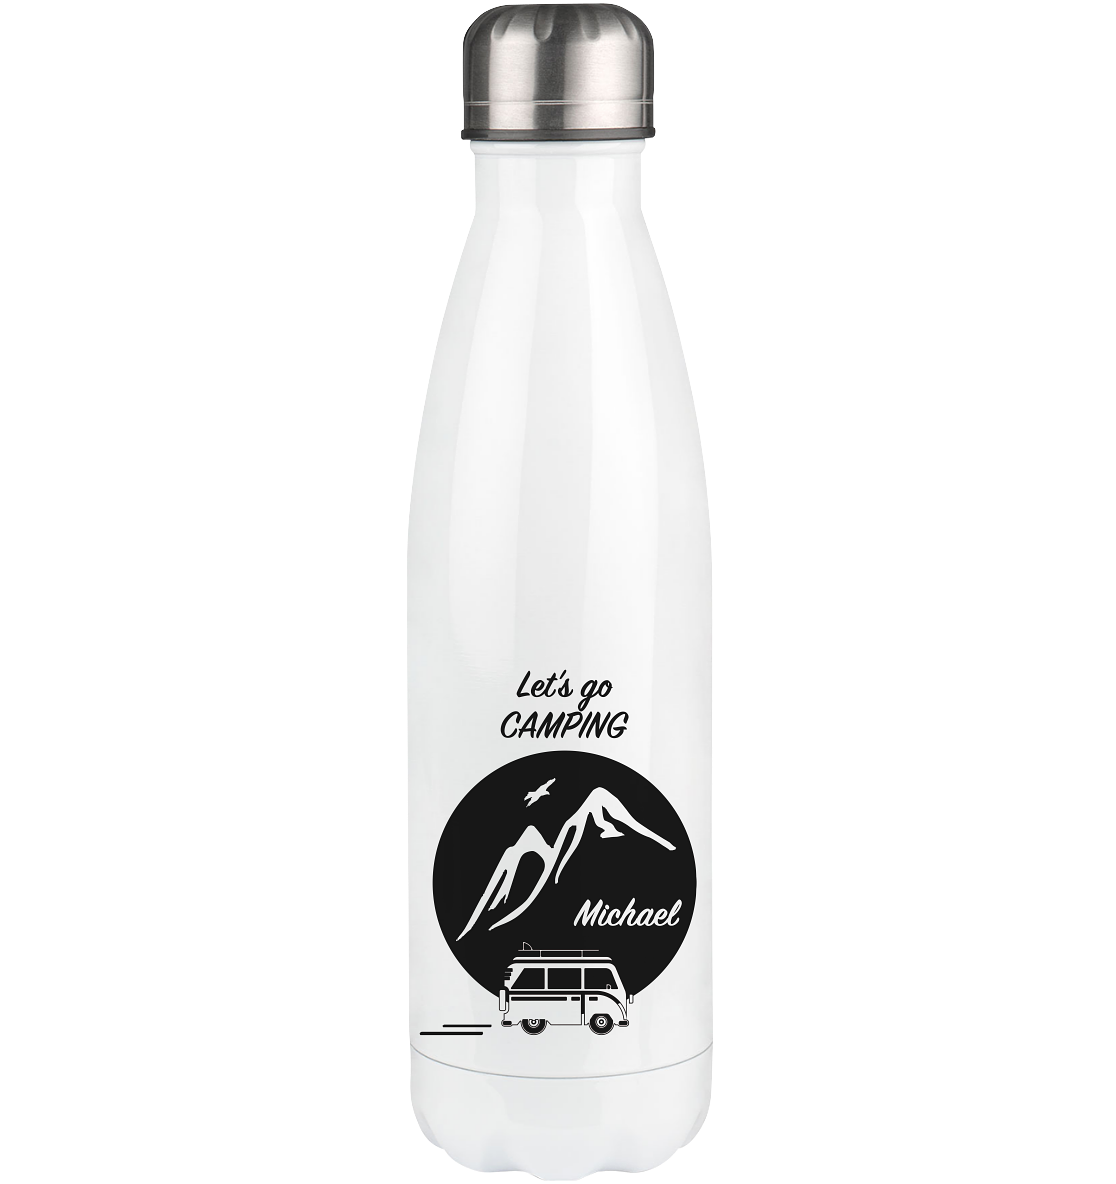 Let's go CAMPING - Thermoflasche 500ml